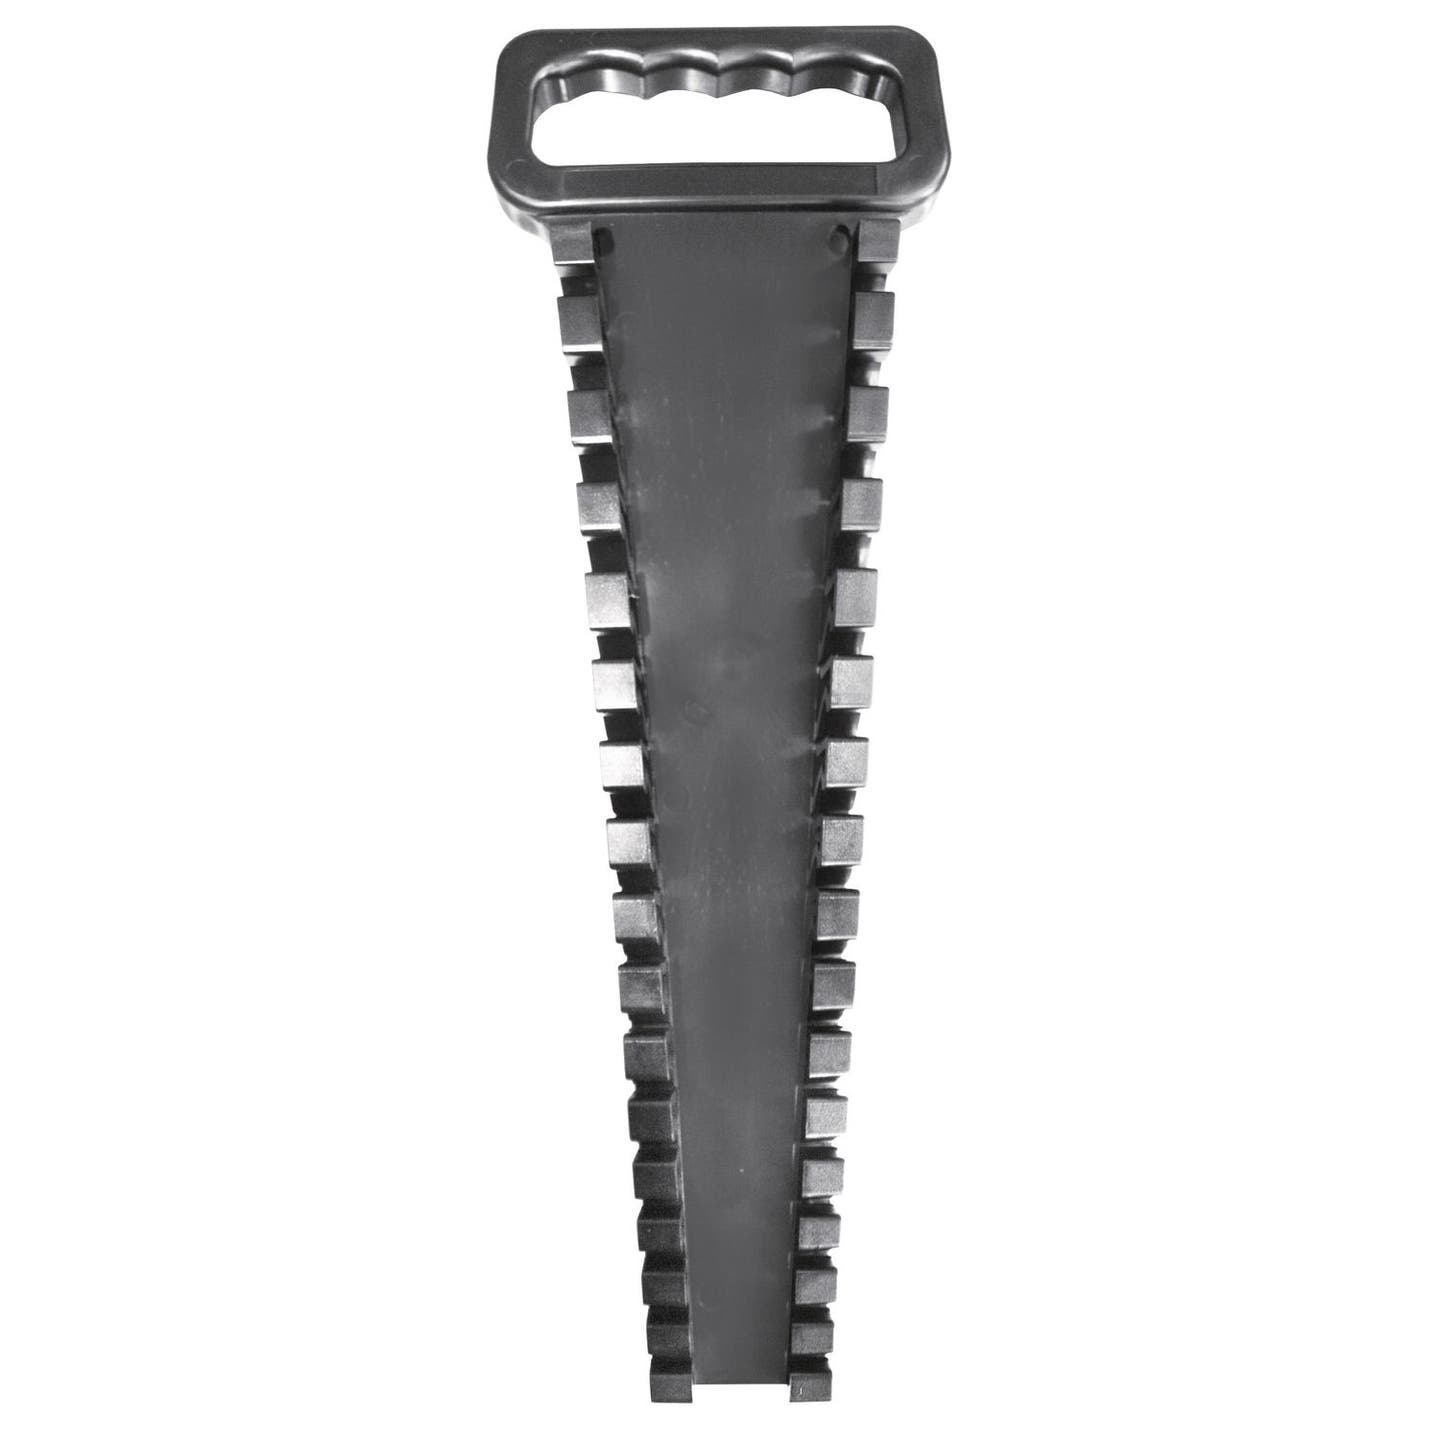 16 PIECE 72 TOOTH WRENCH RACK